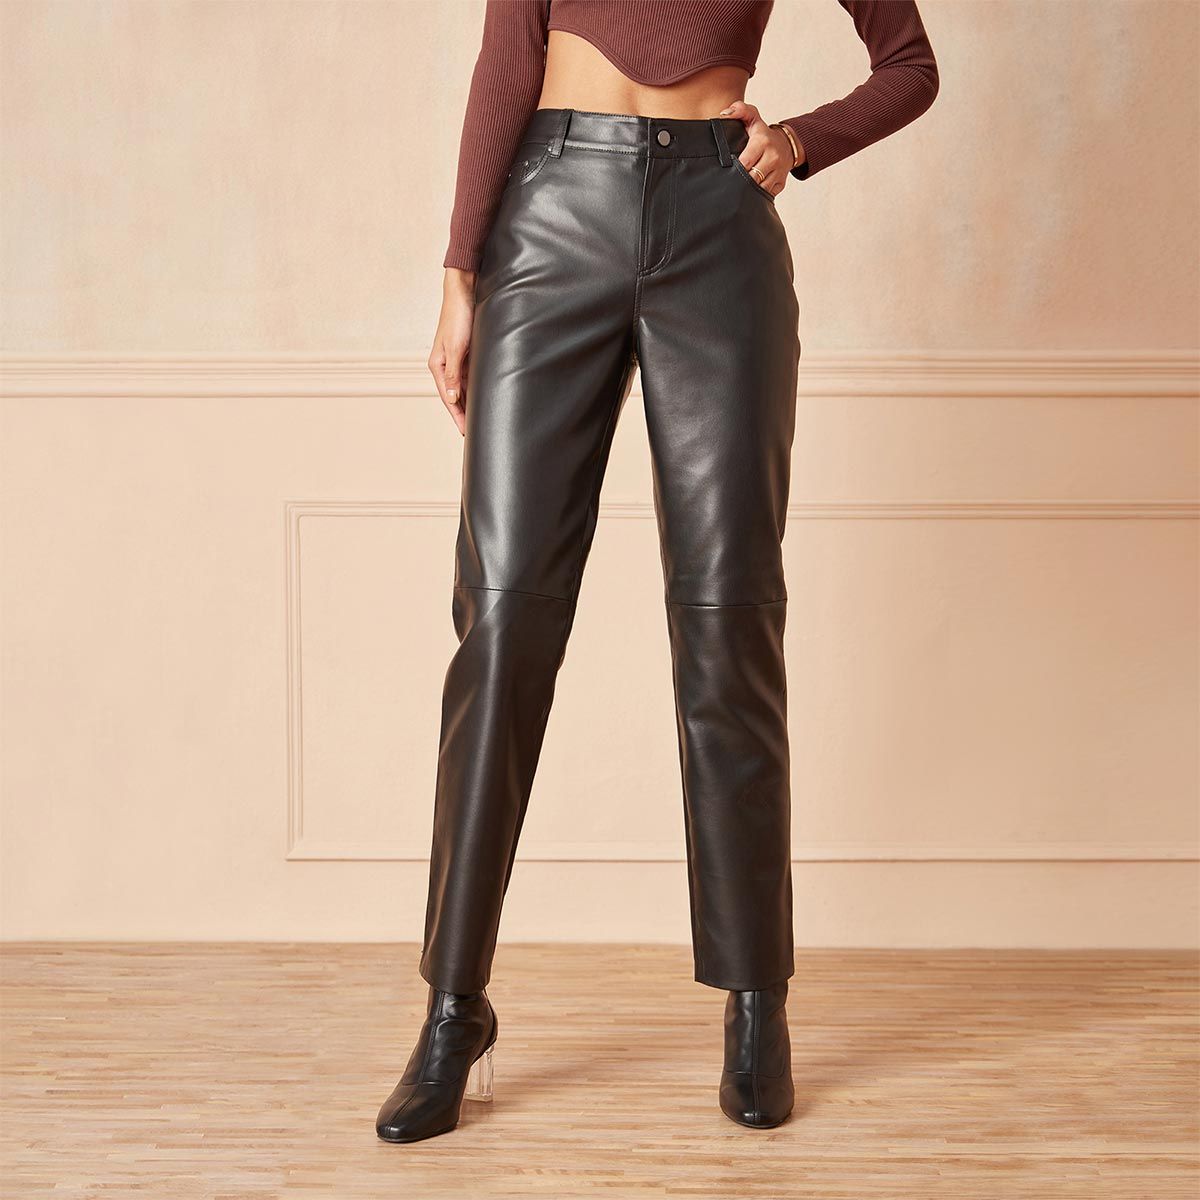 RSVP by Nykaa Fashion Black Solid Straight Fit Faux Leather Pants Buy RSVP  by Nykaa Fashion Black Solid Straight Fit Faux Leather Pants Online at Best  Price in India  Nykaa